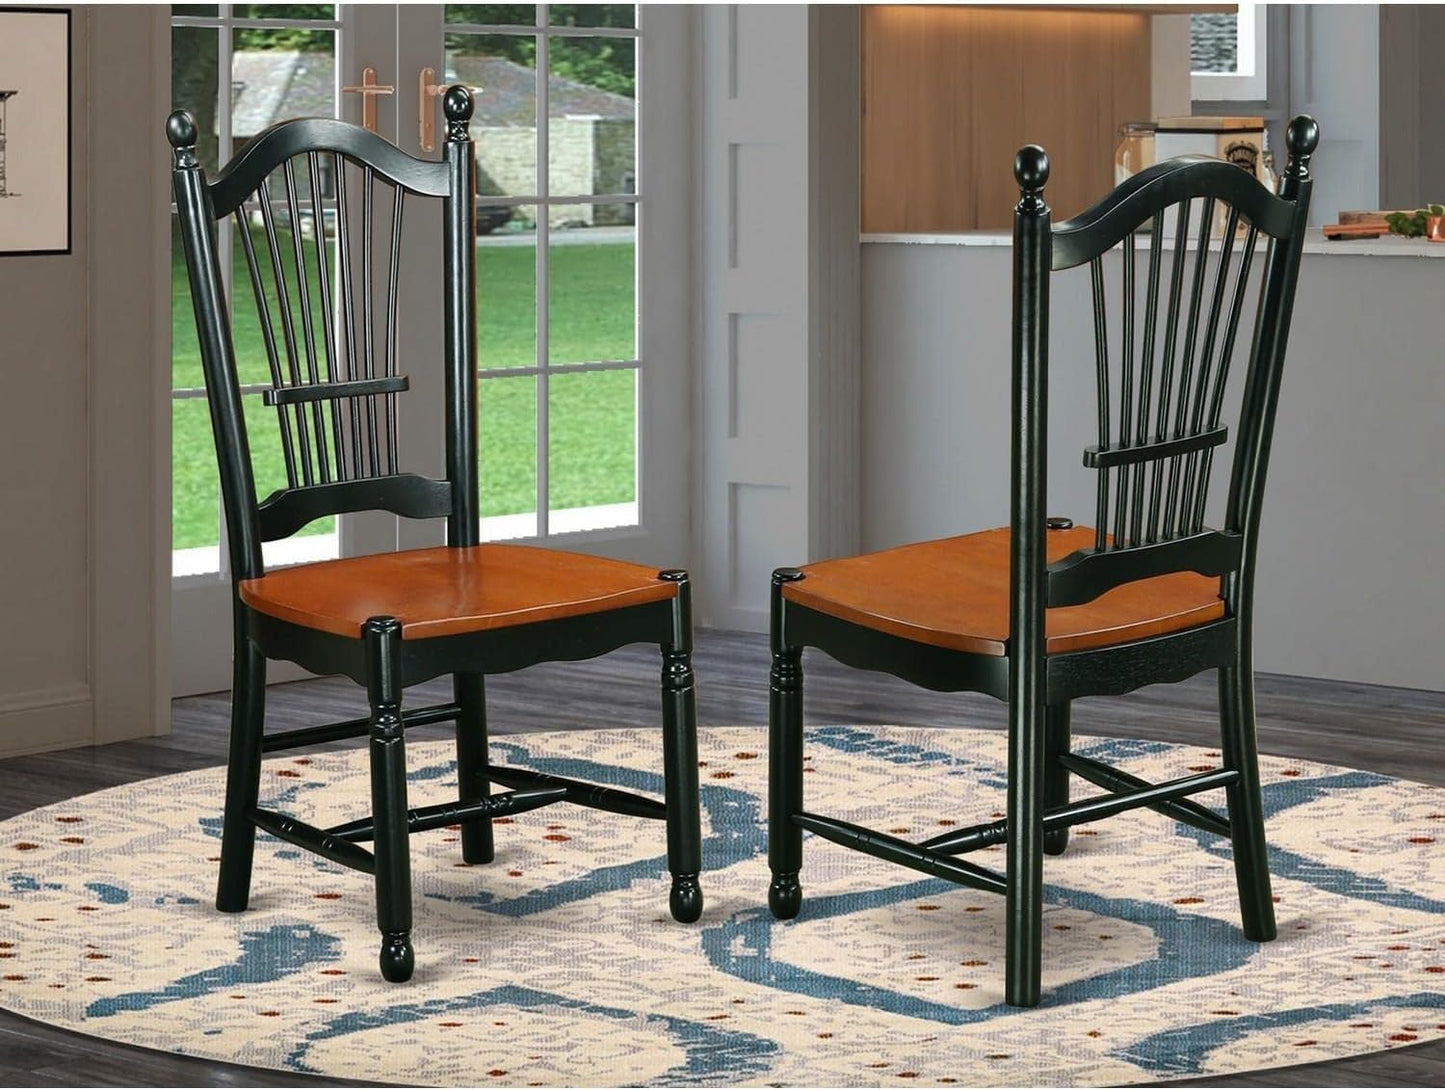 East West Furniture DOC-BCH-W Dover Dining Chairs - Slat Back Wood Seat Kitchen Chairs, Set of 2, Black & Cherry